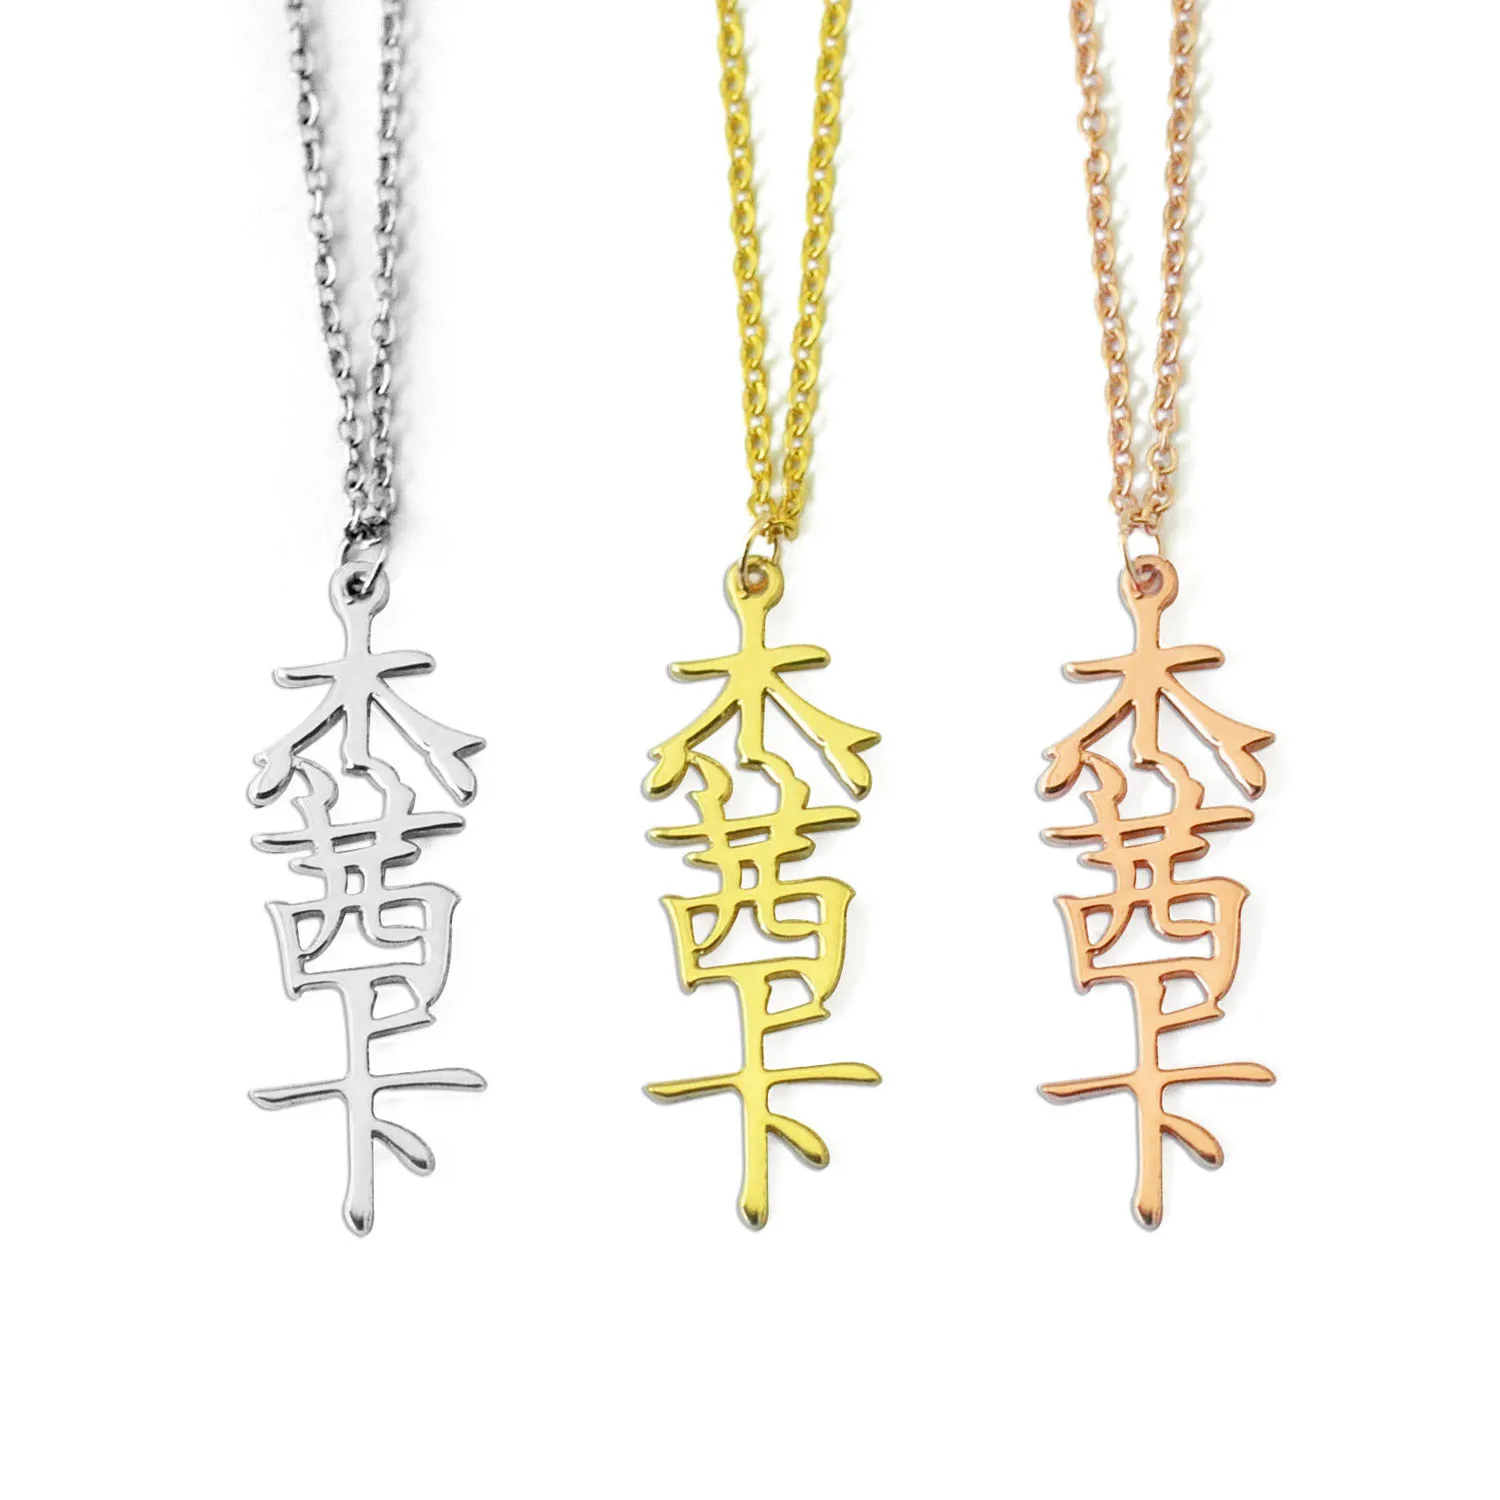 Personalized Chinese Name Necklace Custom Mandarin Pendant Necklace Nameplate Jewelry Birthday Friendship Gifts For Women Girls personalized chinese name necklace mandarin necklaces custom nameplate jewelry gift chinese characters pendant necklace